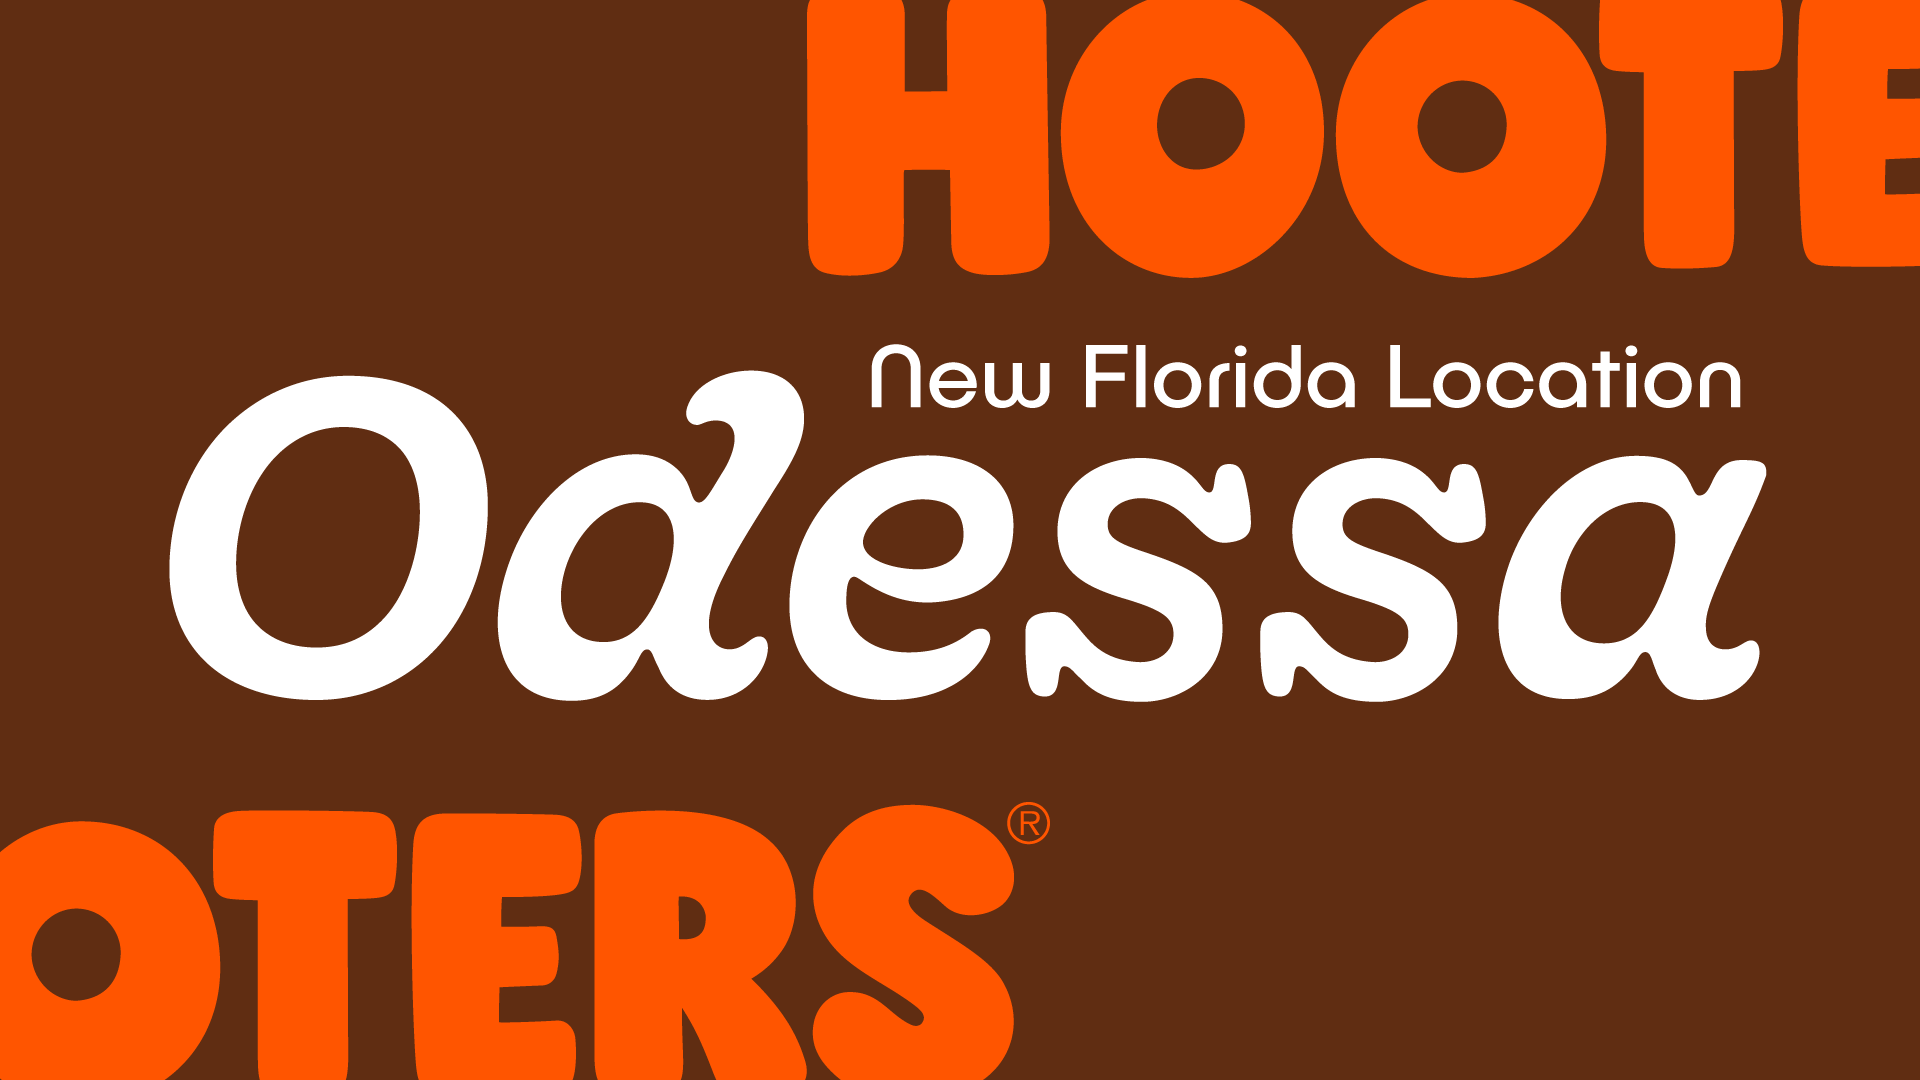 Hooters of Odessa, Florida - Opening January 2021